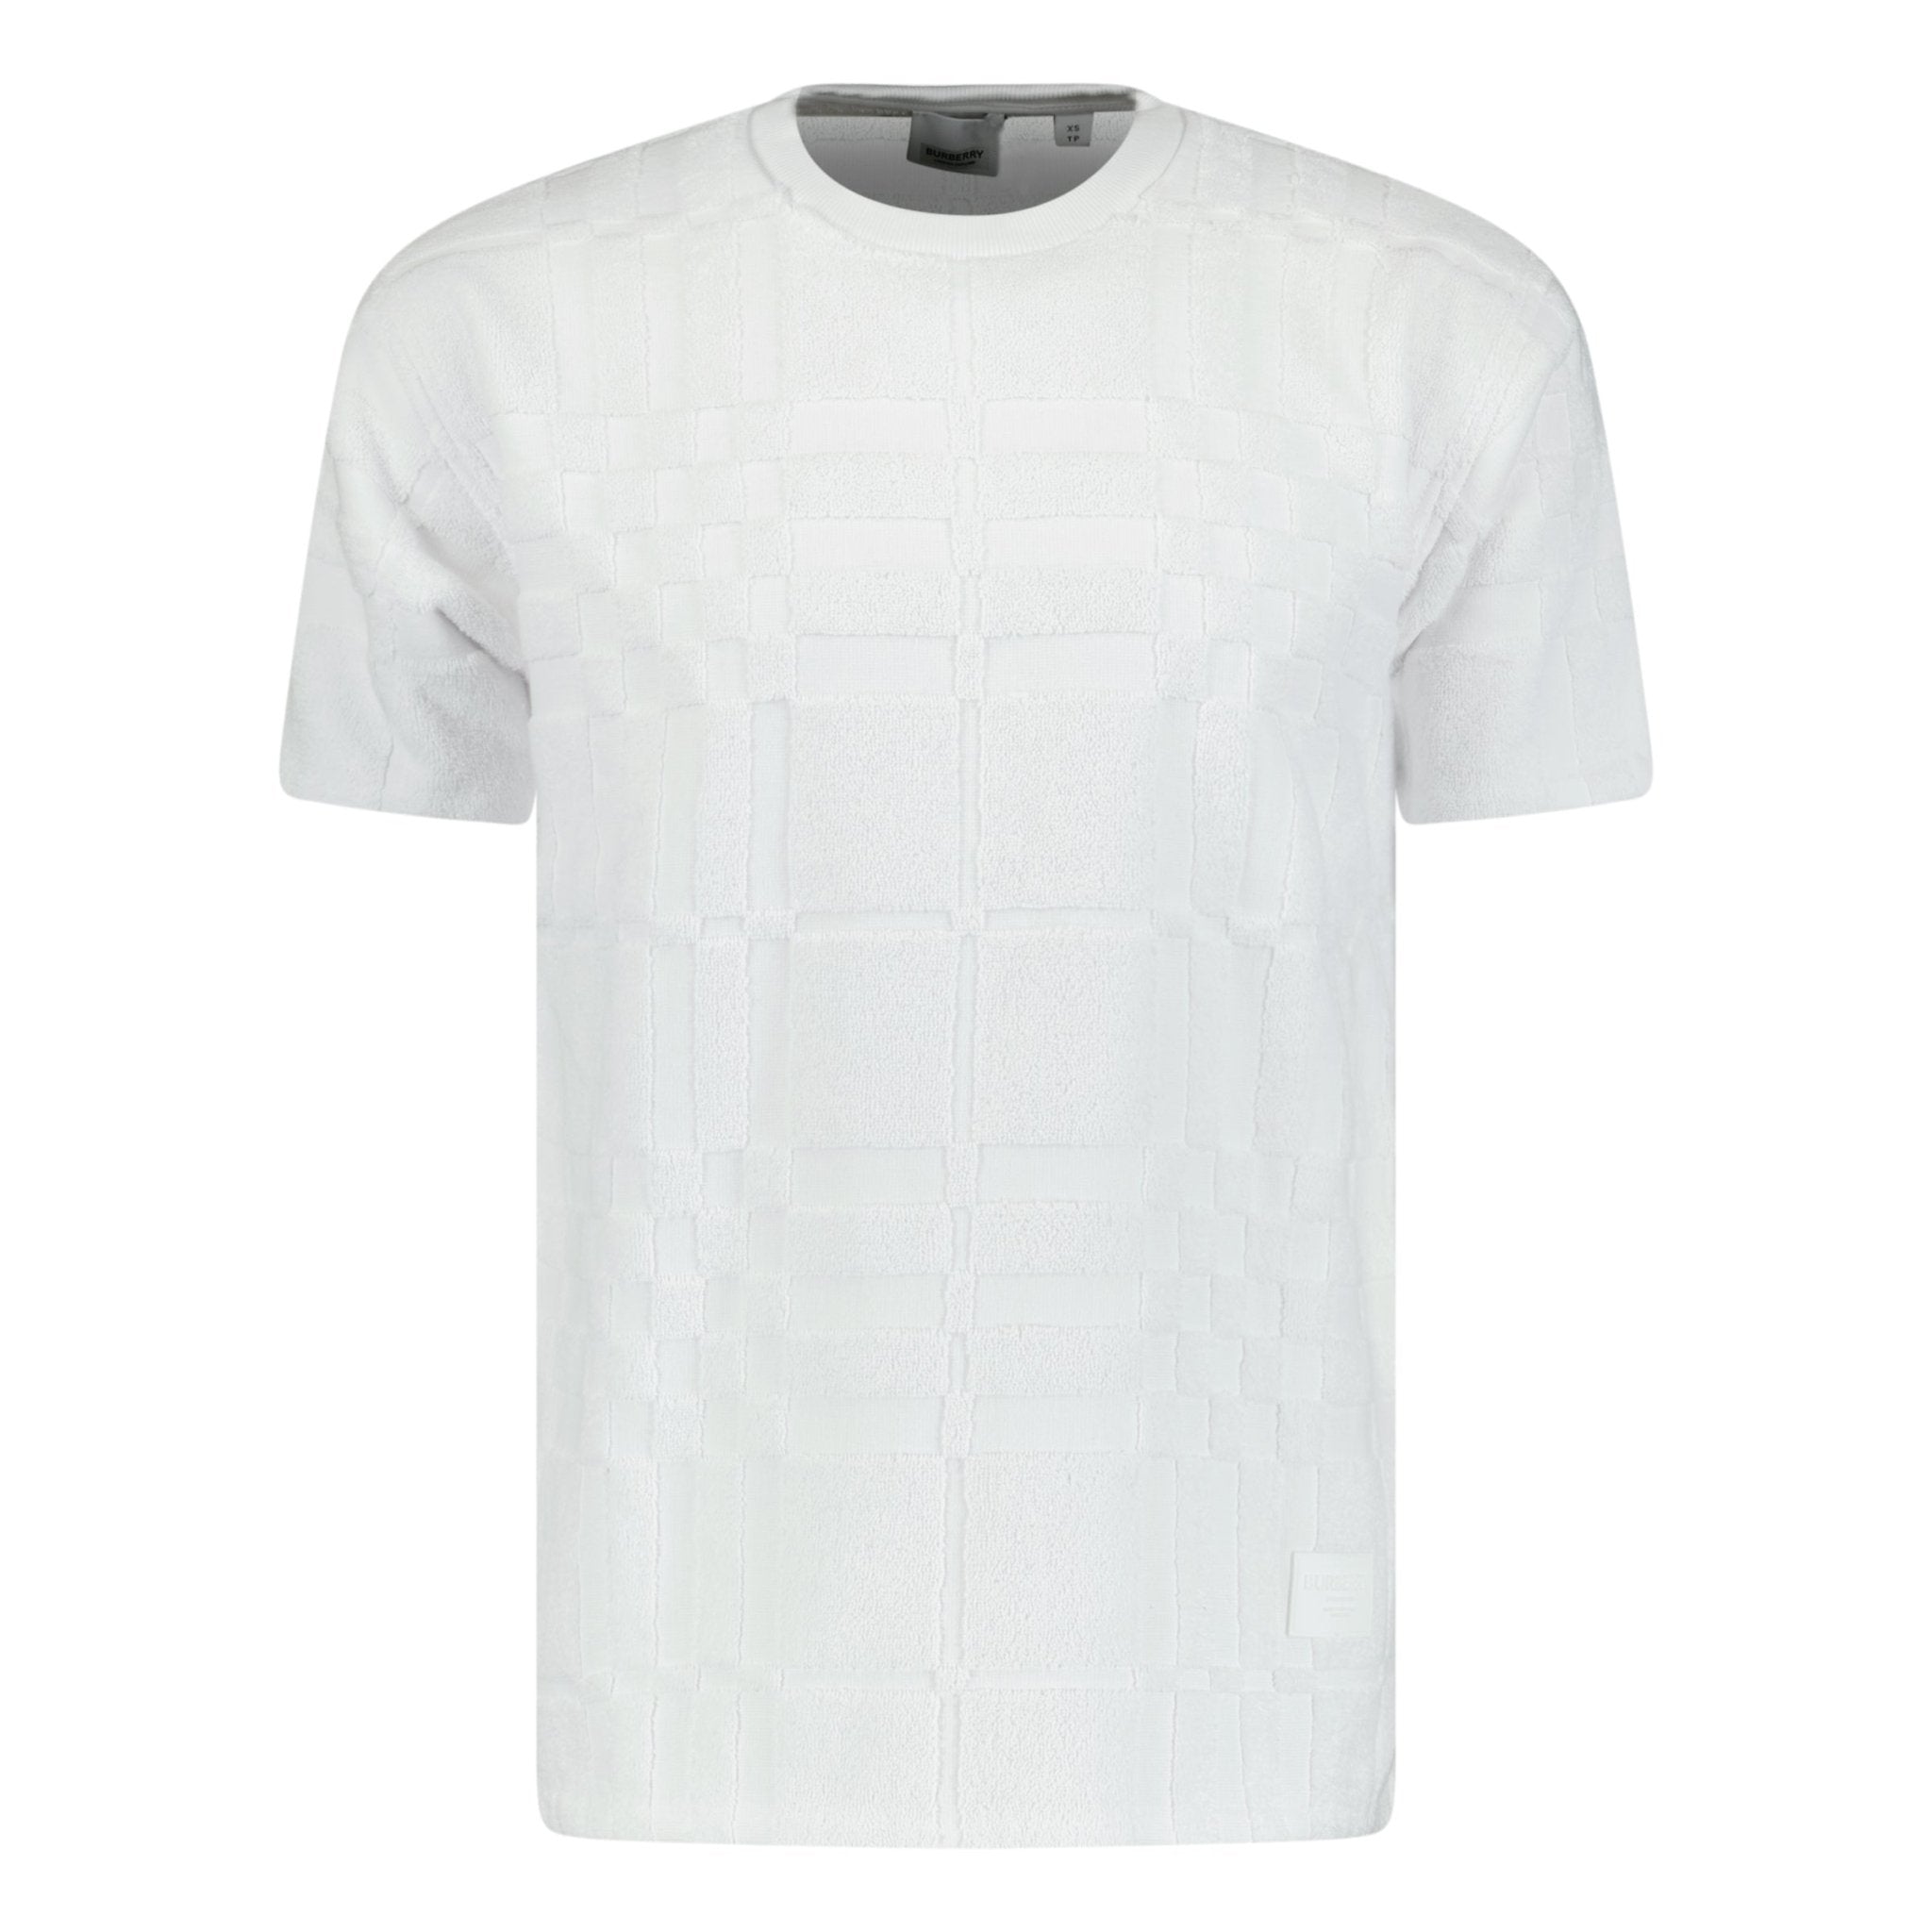 Burberry 'Willesden' Check Knit Cotton Terry T-Shirt White